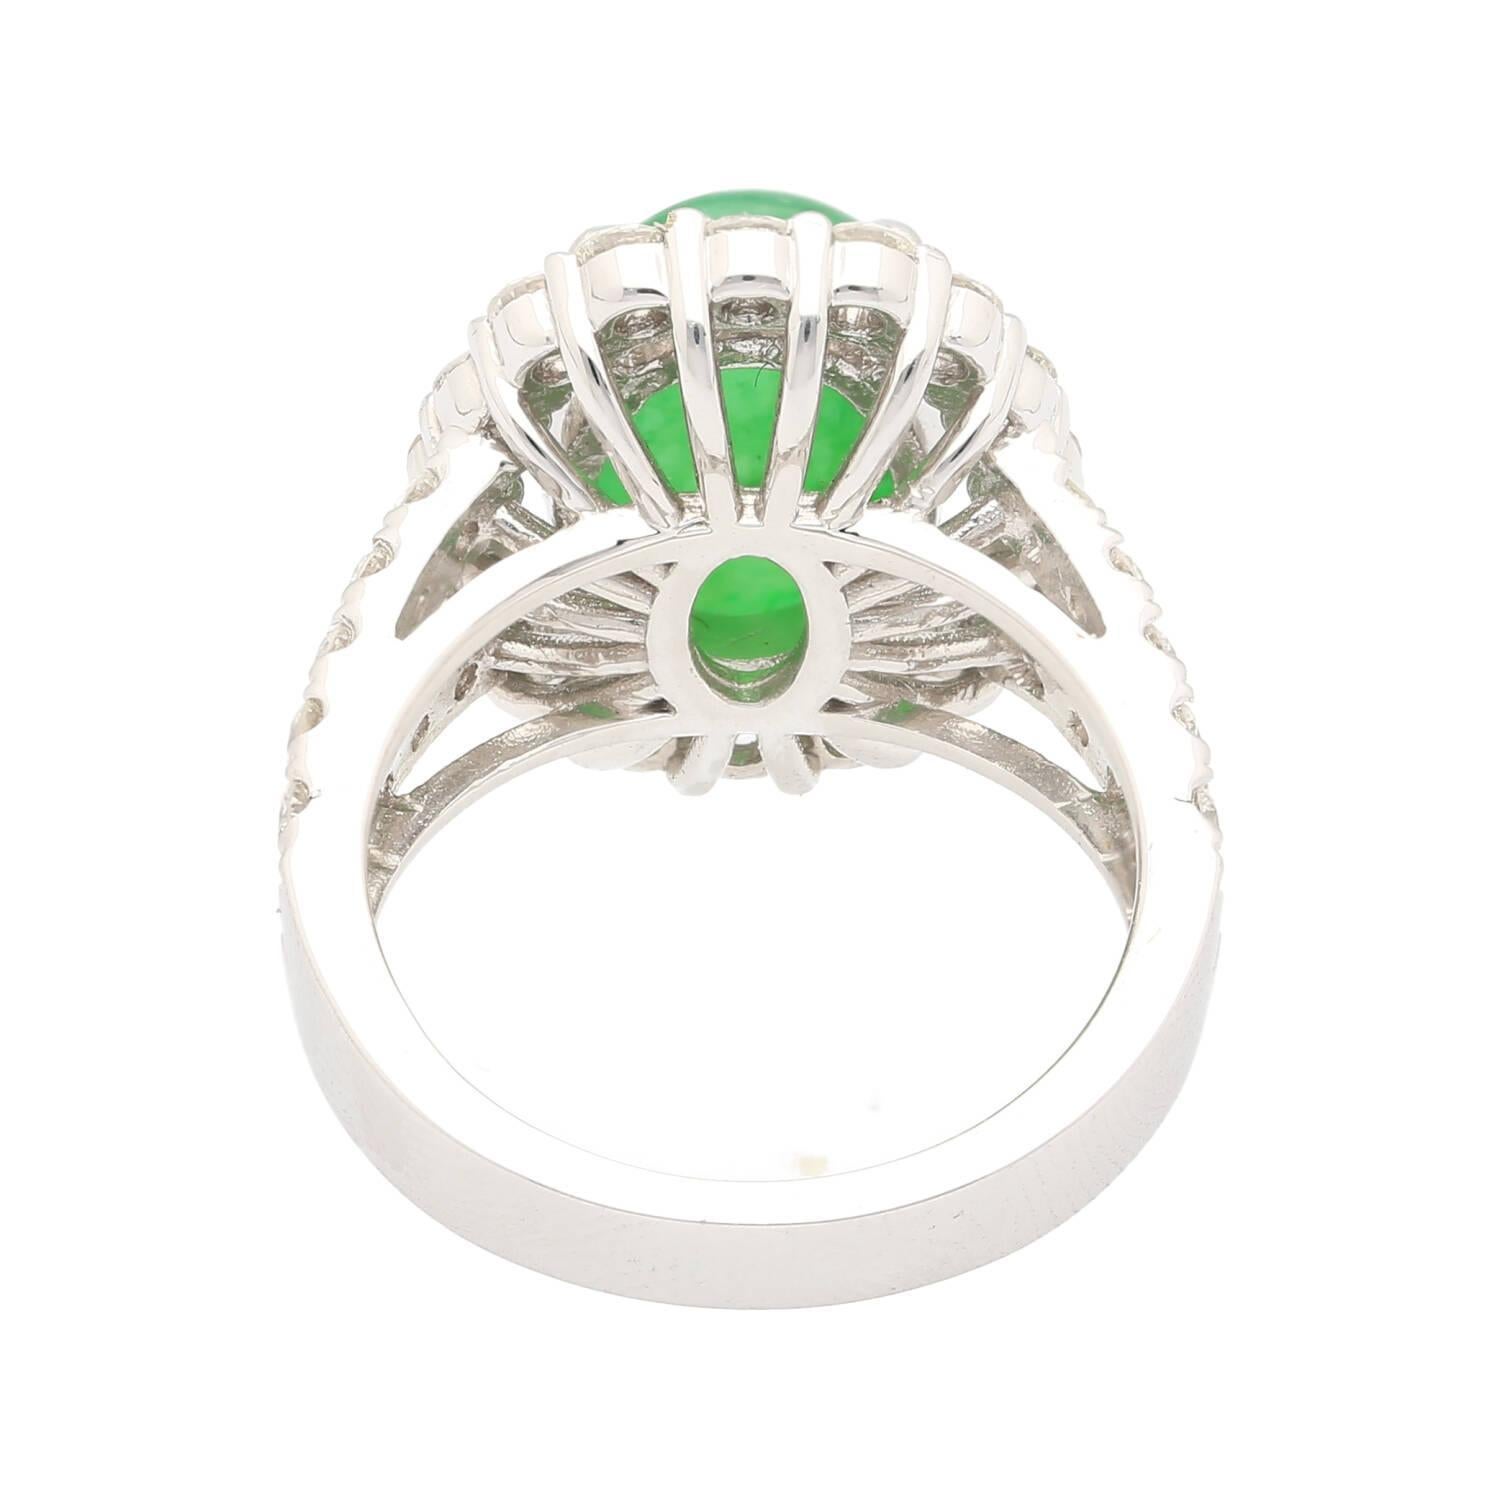 HK Lab Certified 5.329 Carat Jade and Diamond Halo Ring in 18K White Gold In New Condition For Sale In Miami, FL